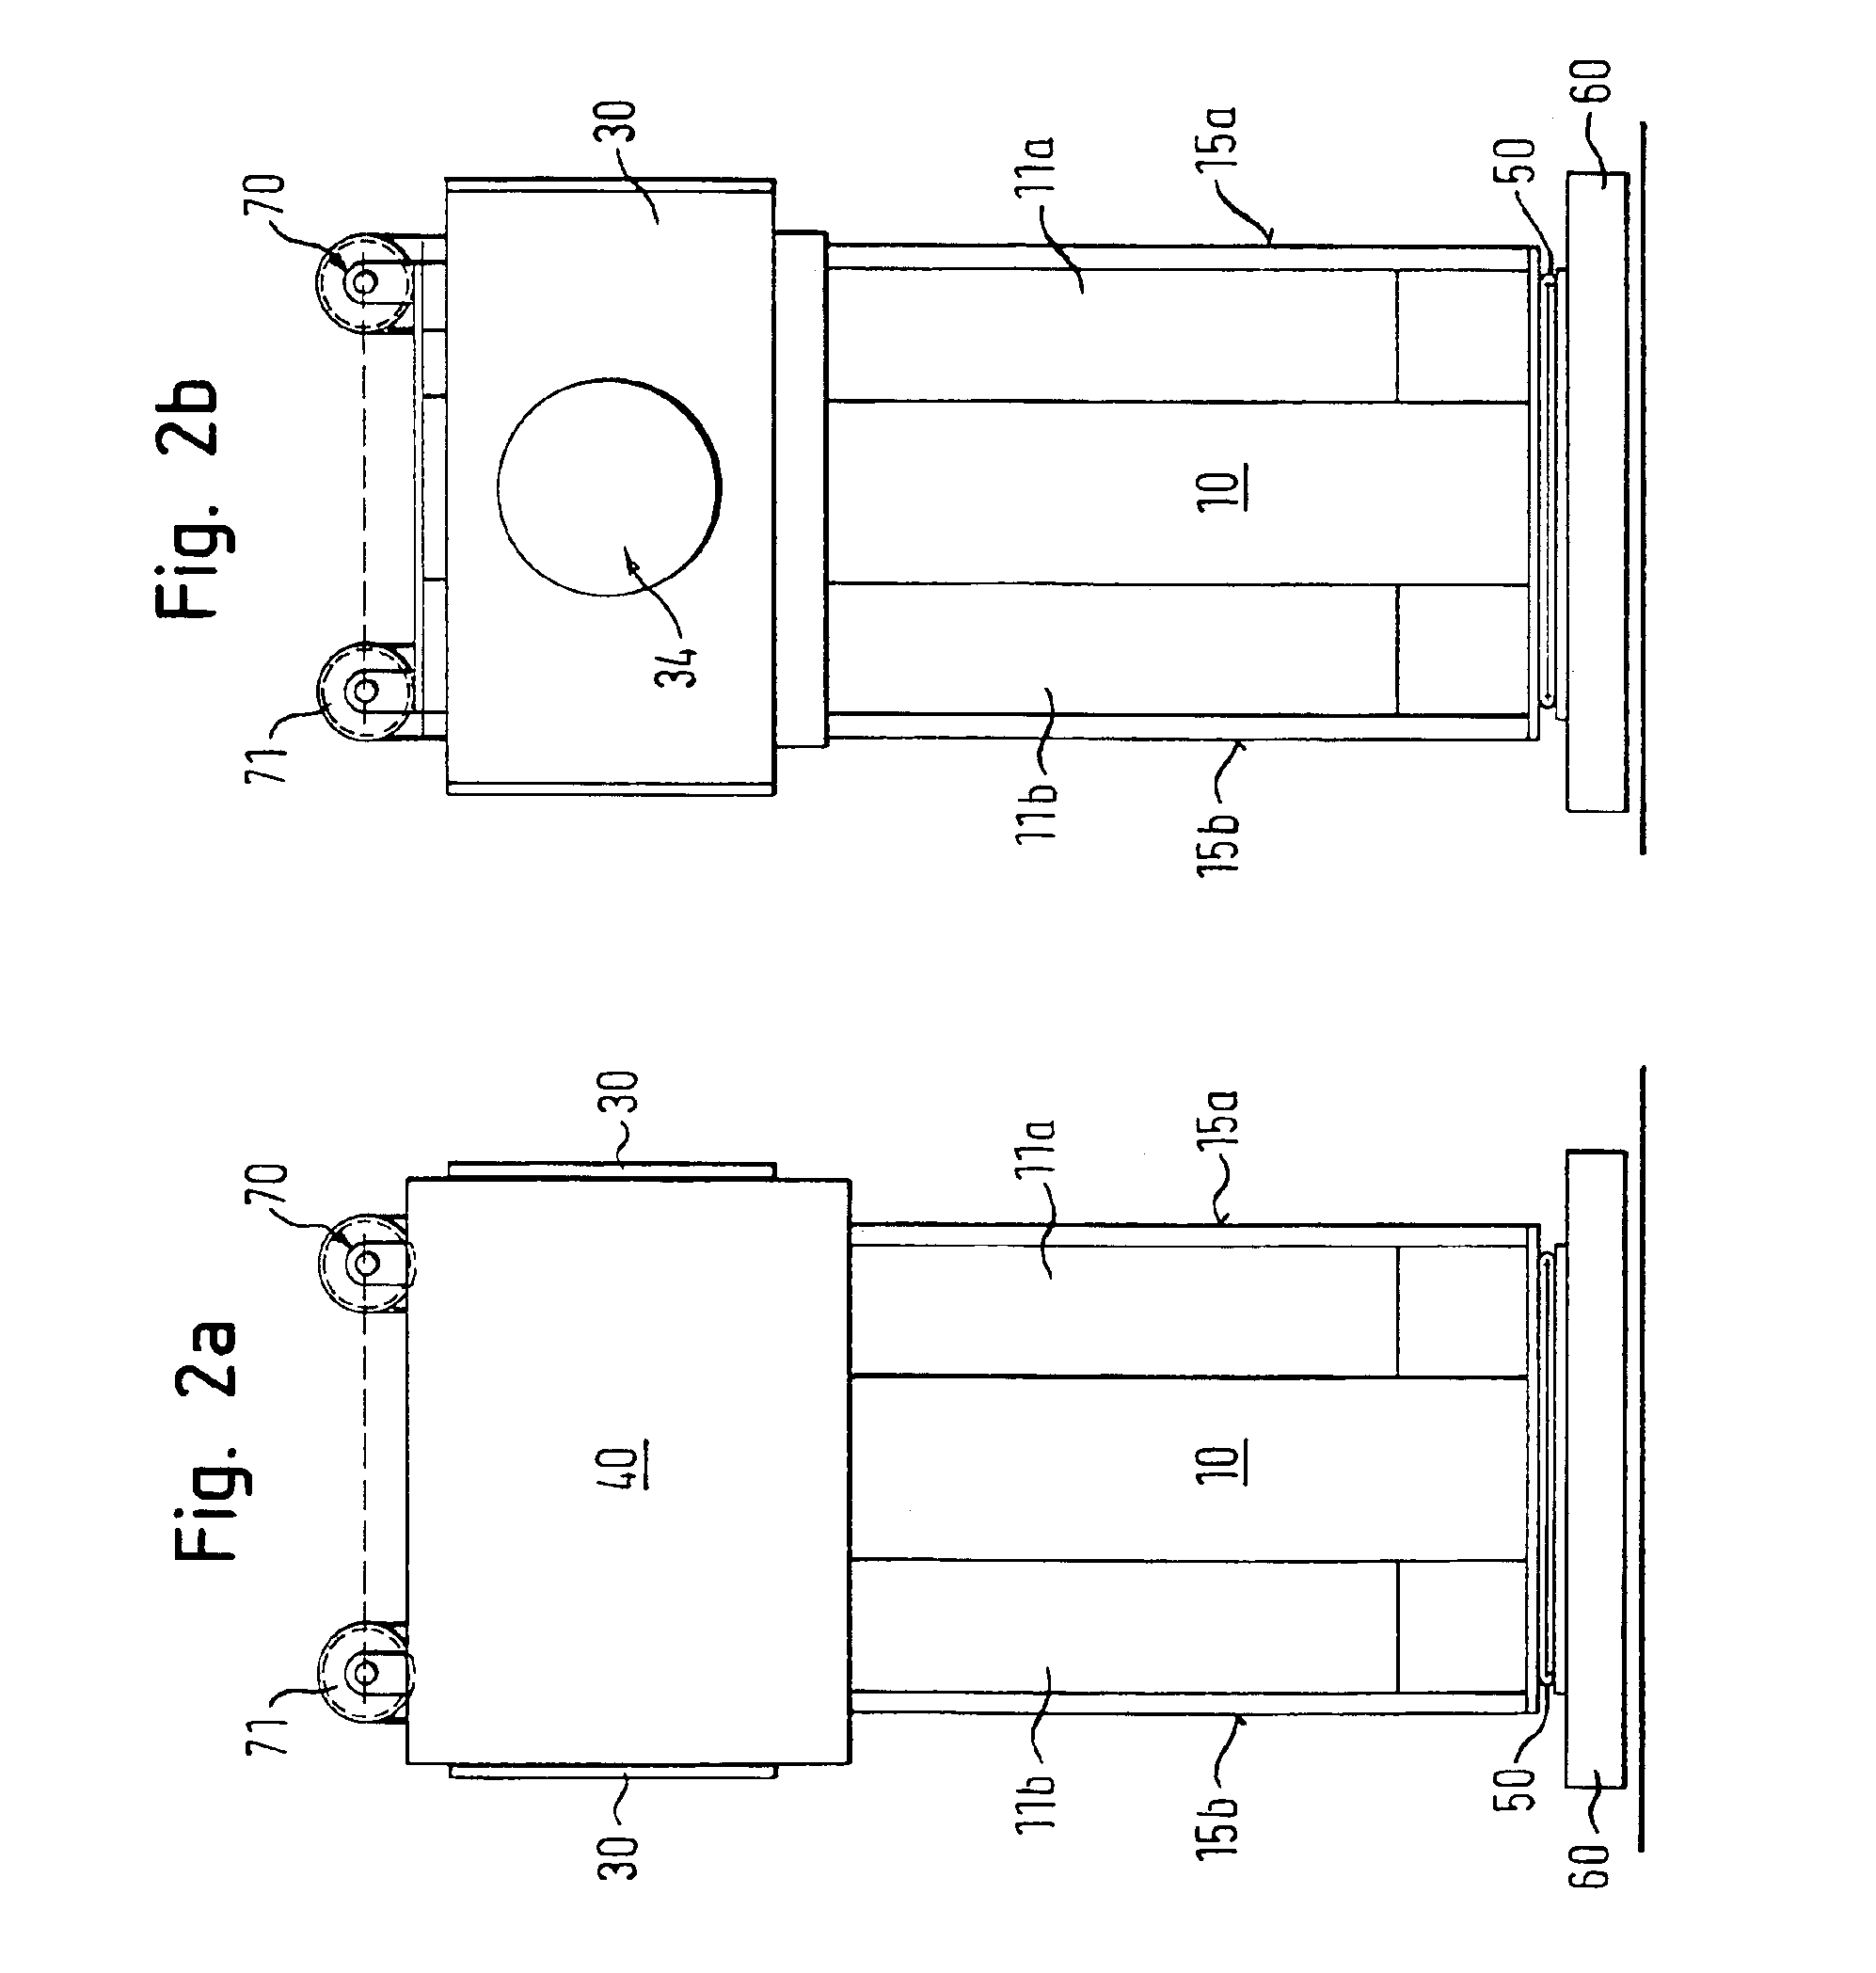 Handling device, especially for positioning a test head on a testing device